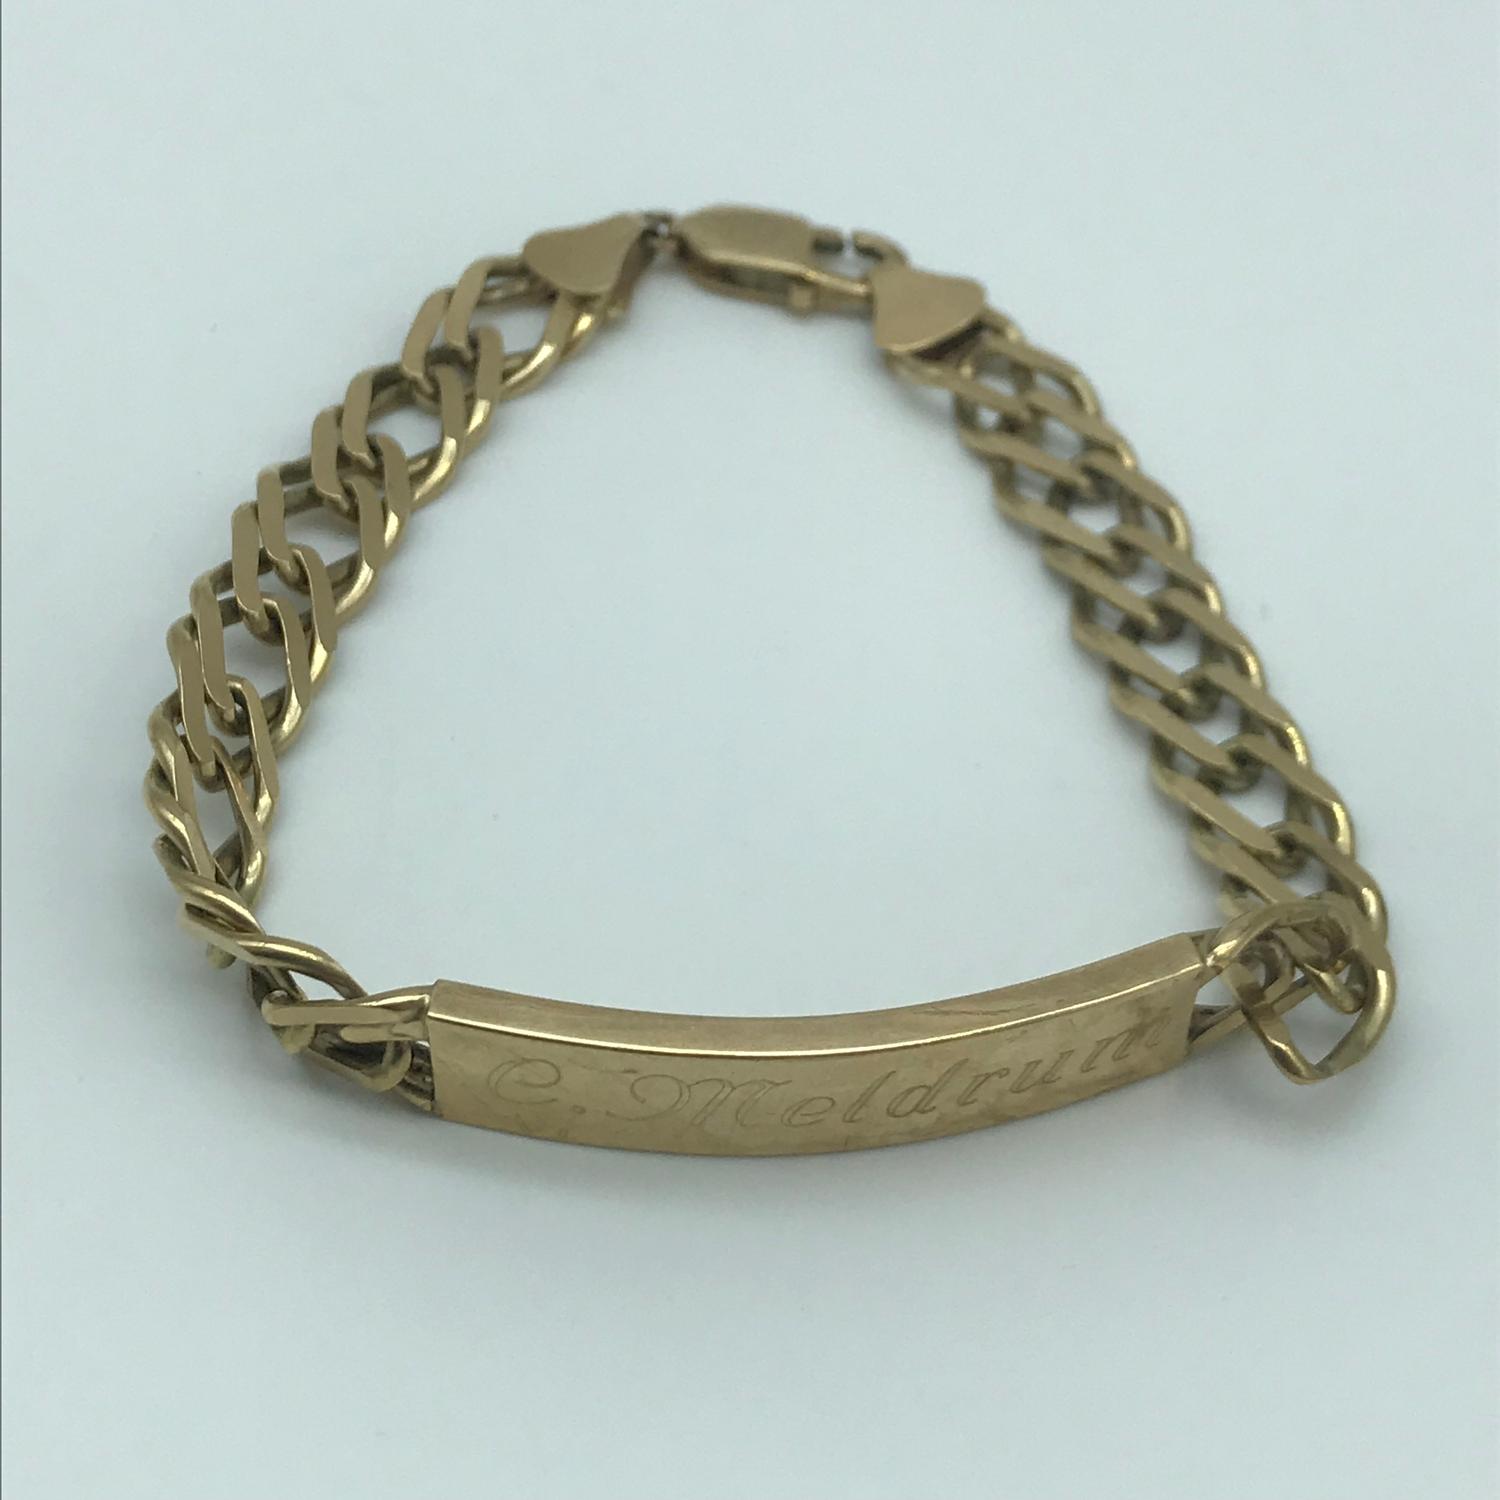 A 9ct gold gents curb I.D Bracelet, Engraved (Could be buffered off) Measures 20.5cm in length and